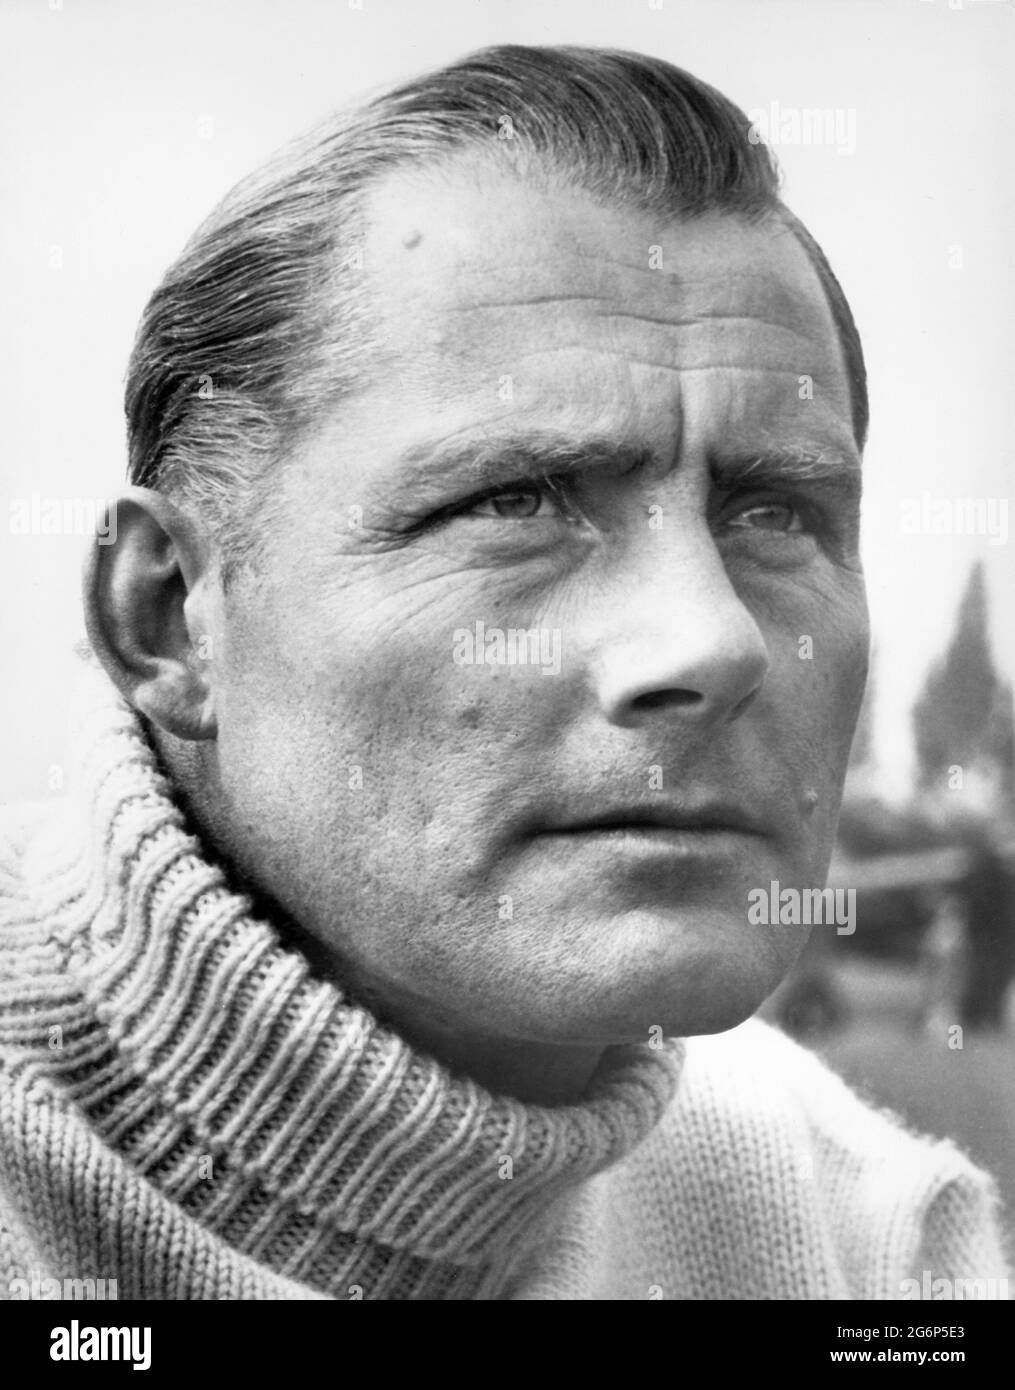 Robert Shaw, Head and Shoulders Publicity Portrait for the Film, 'Battle of Britain', United Artists, 1969 Stock Photo